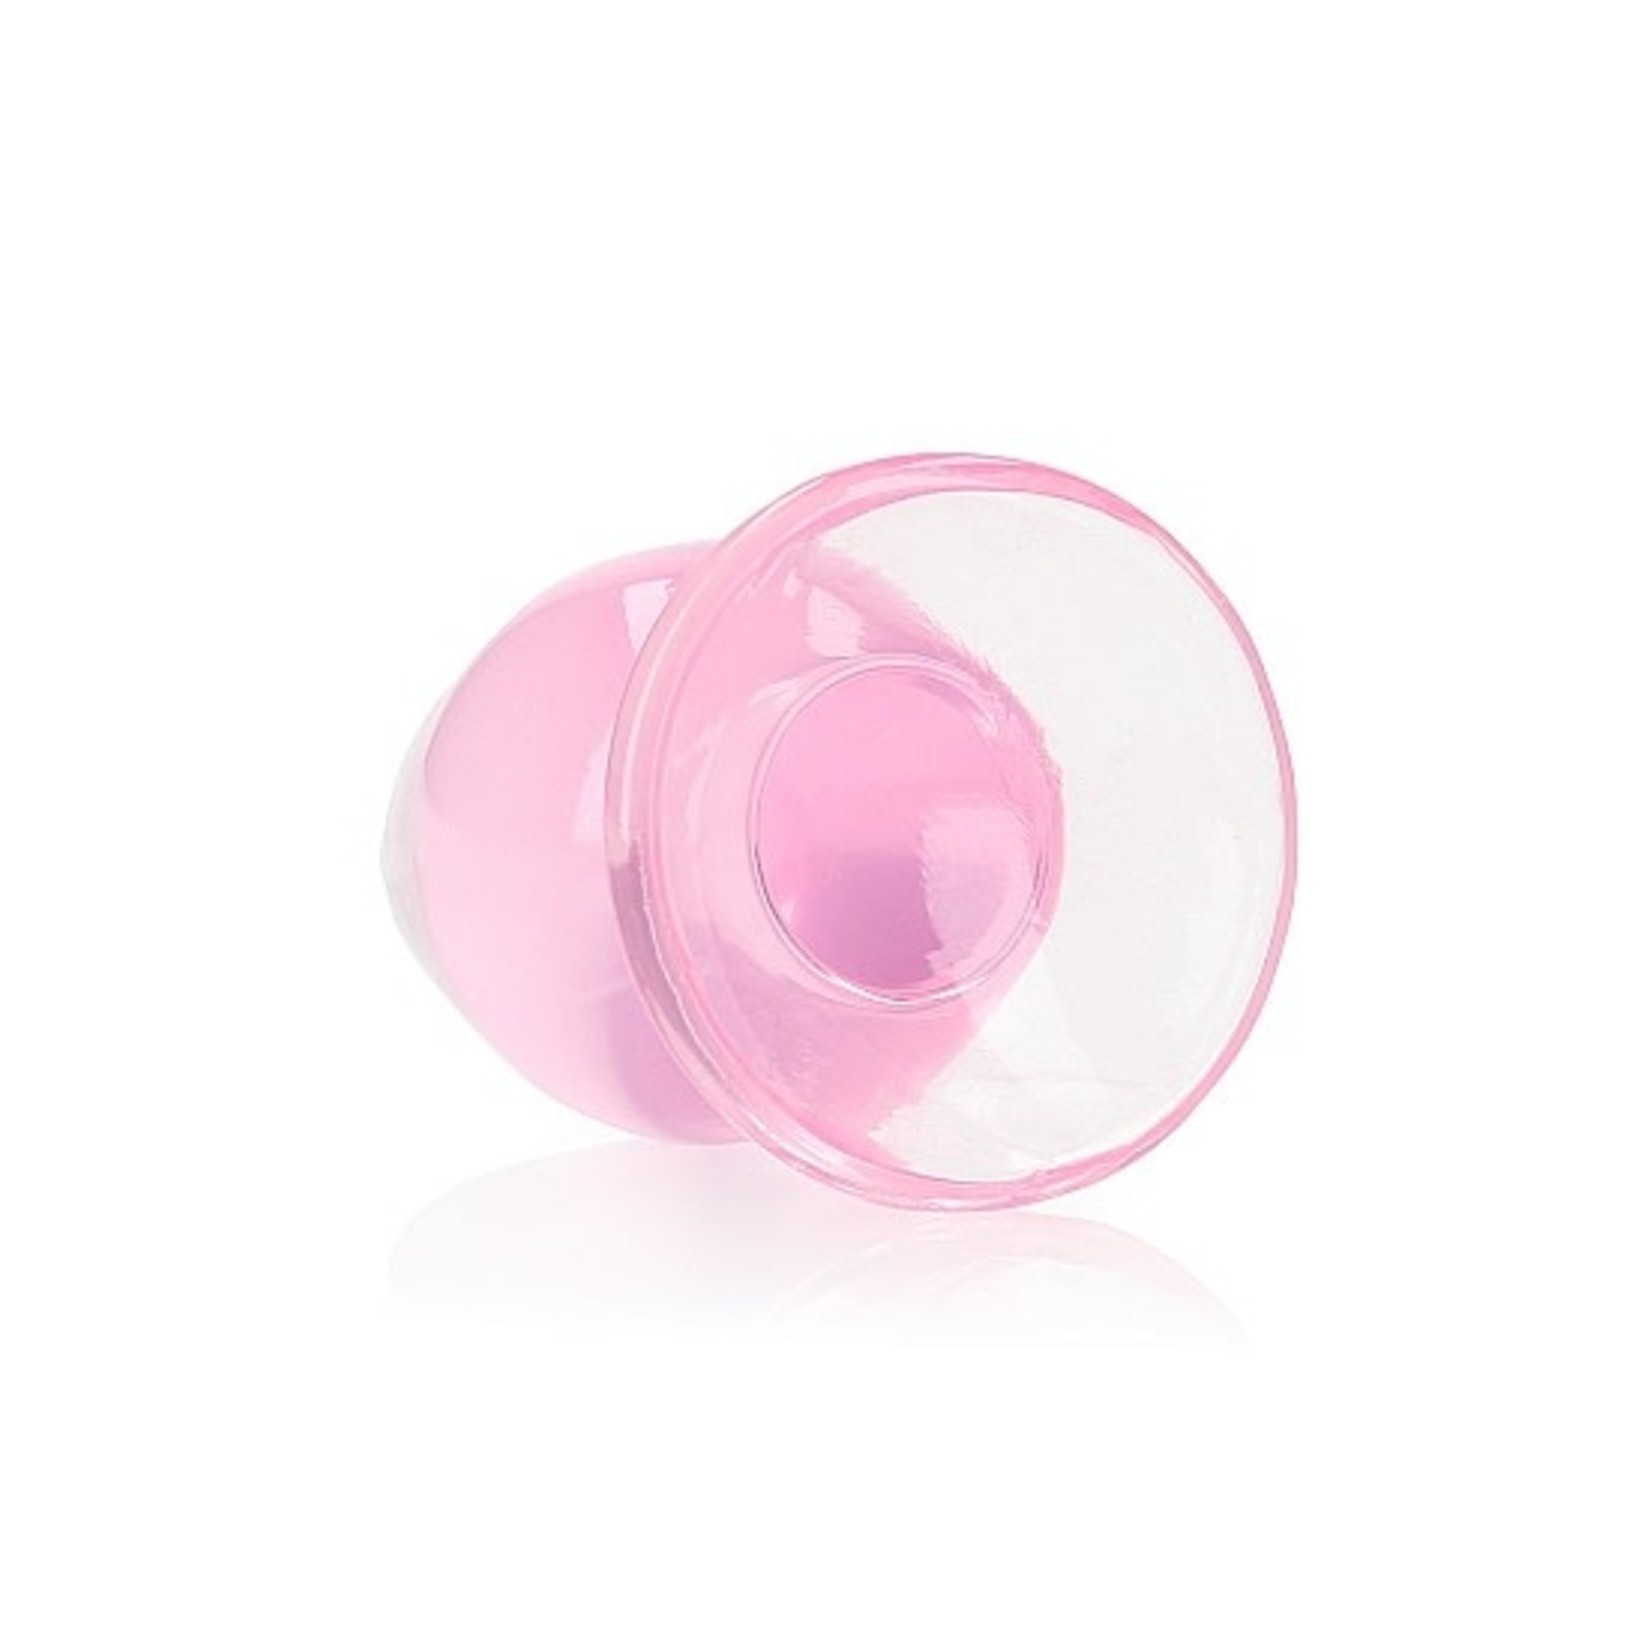 SHOTS REALROCK CRYSTAL CLEAR JELLY 3.5 INCH BUTT PLUG